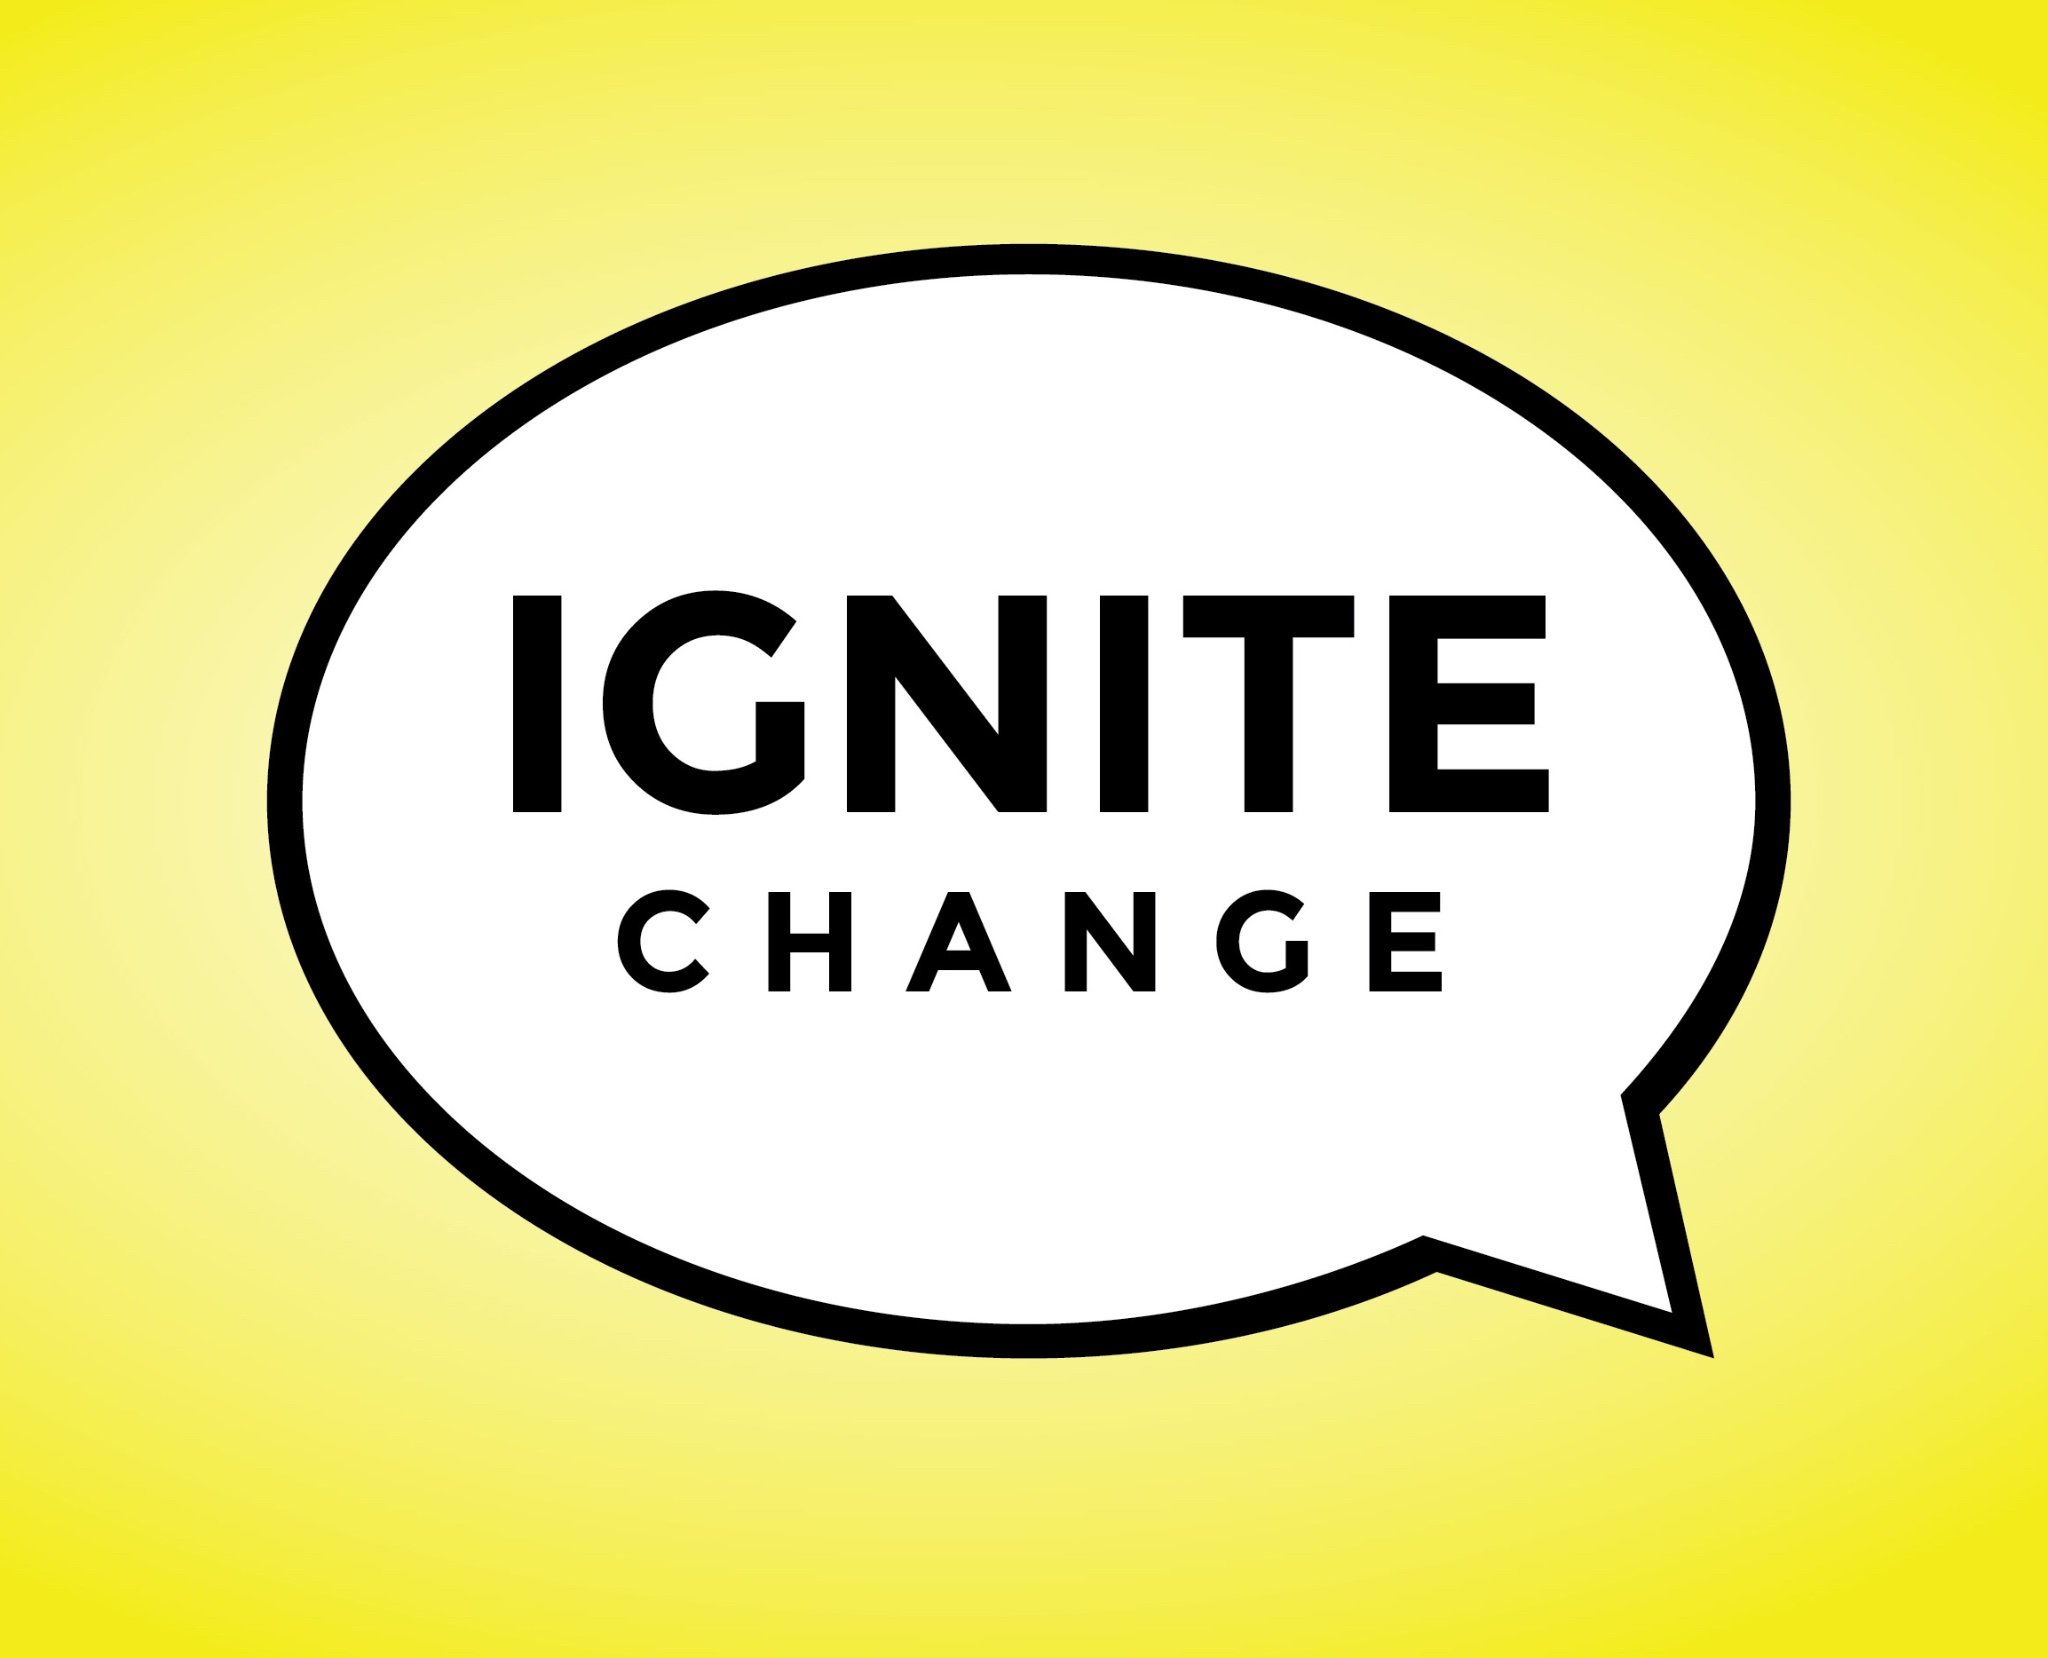 At Ignite Change, we give good voice! We spread the word about people, non-profit agencies and companies that make a powerful difference in their community.